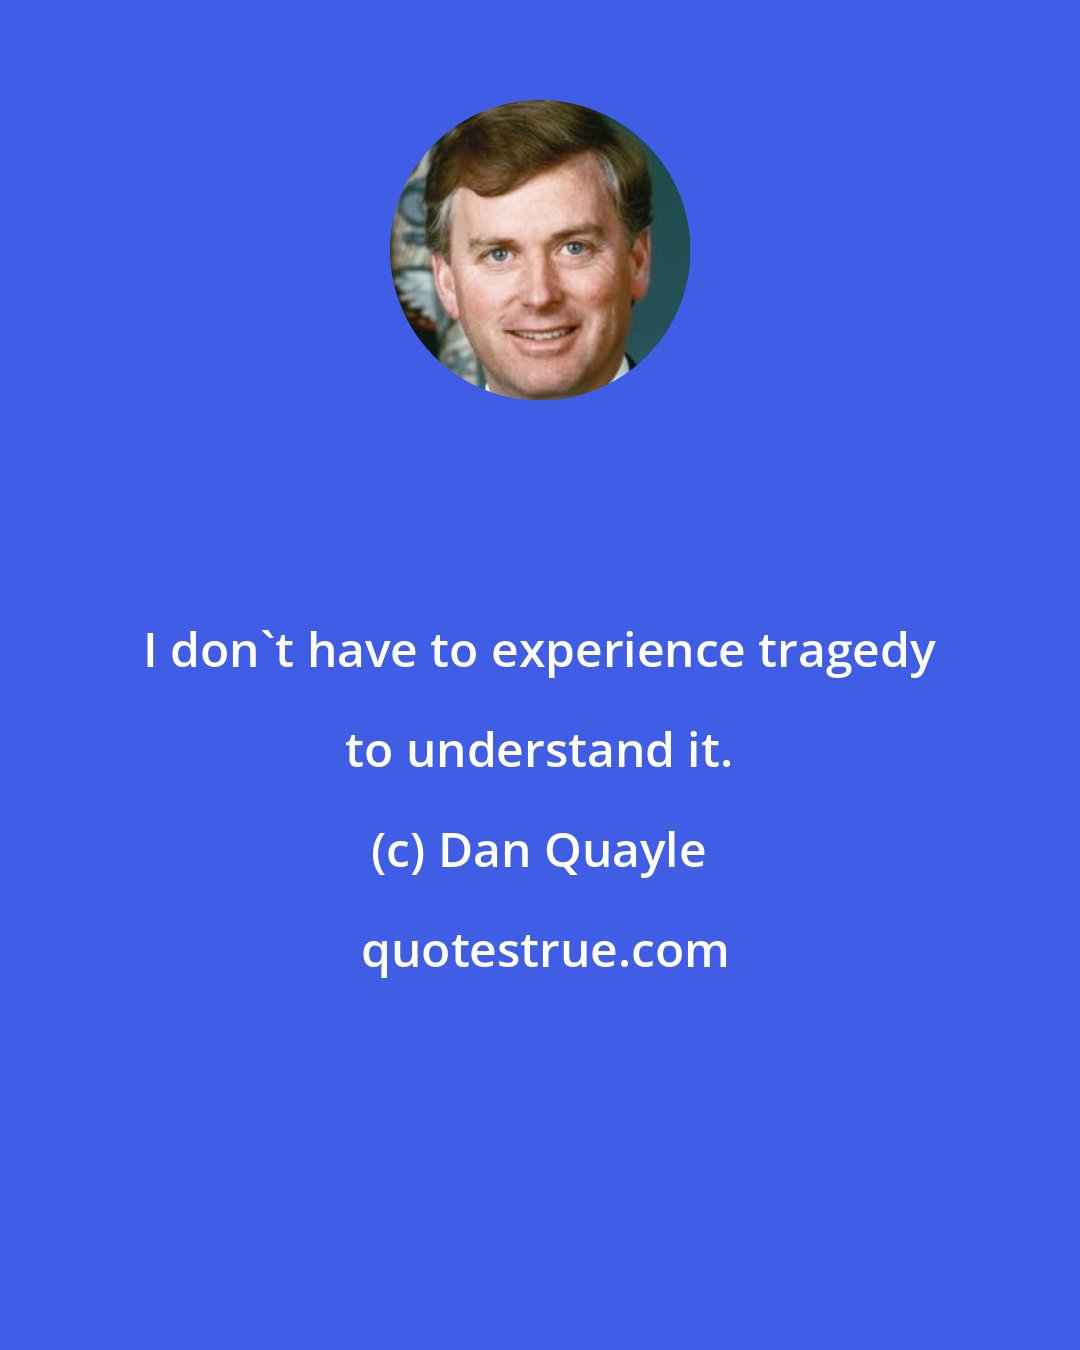 Dan Quayle: I don't have to experience tragedy to understand it.